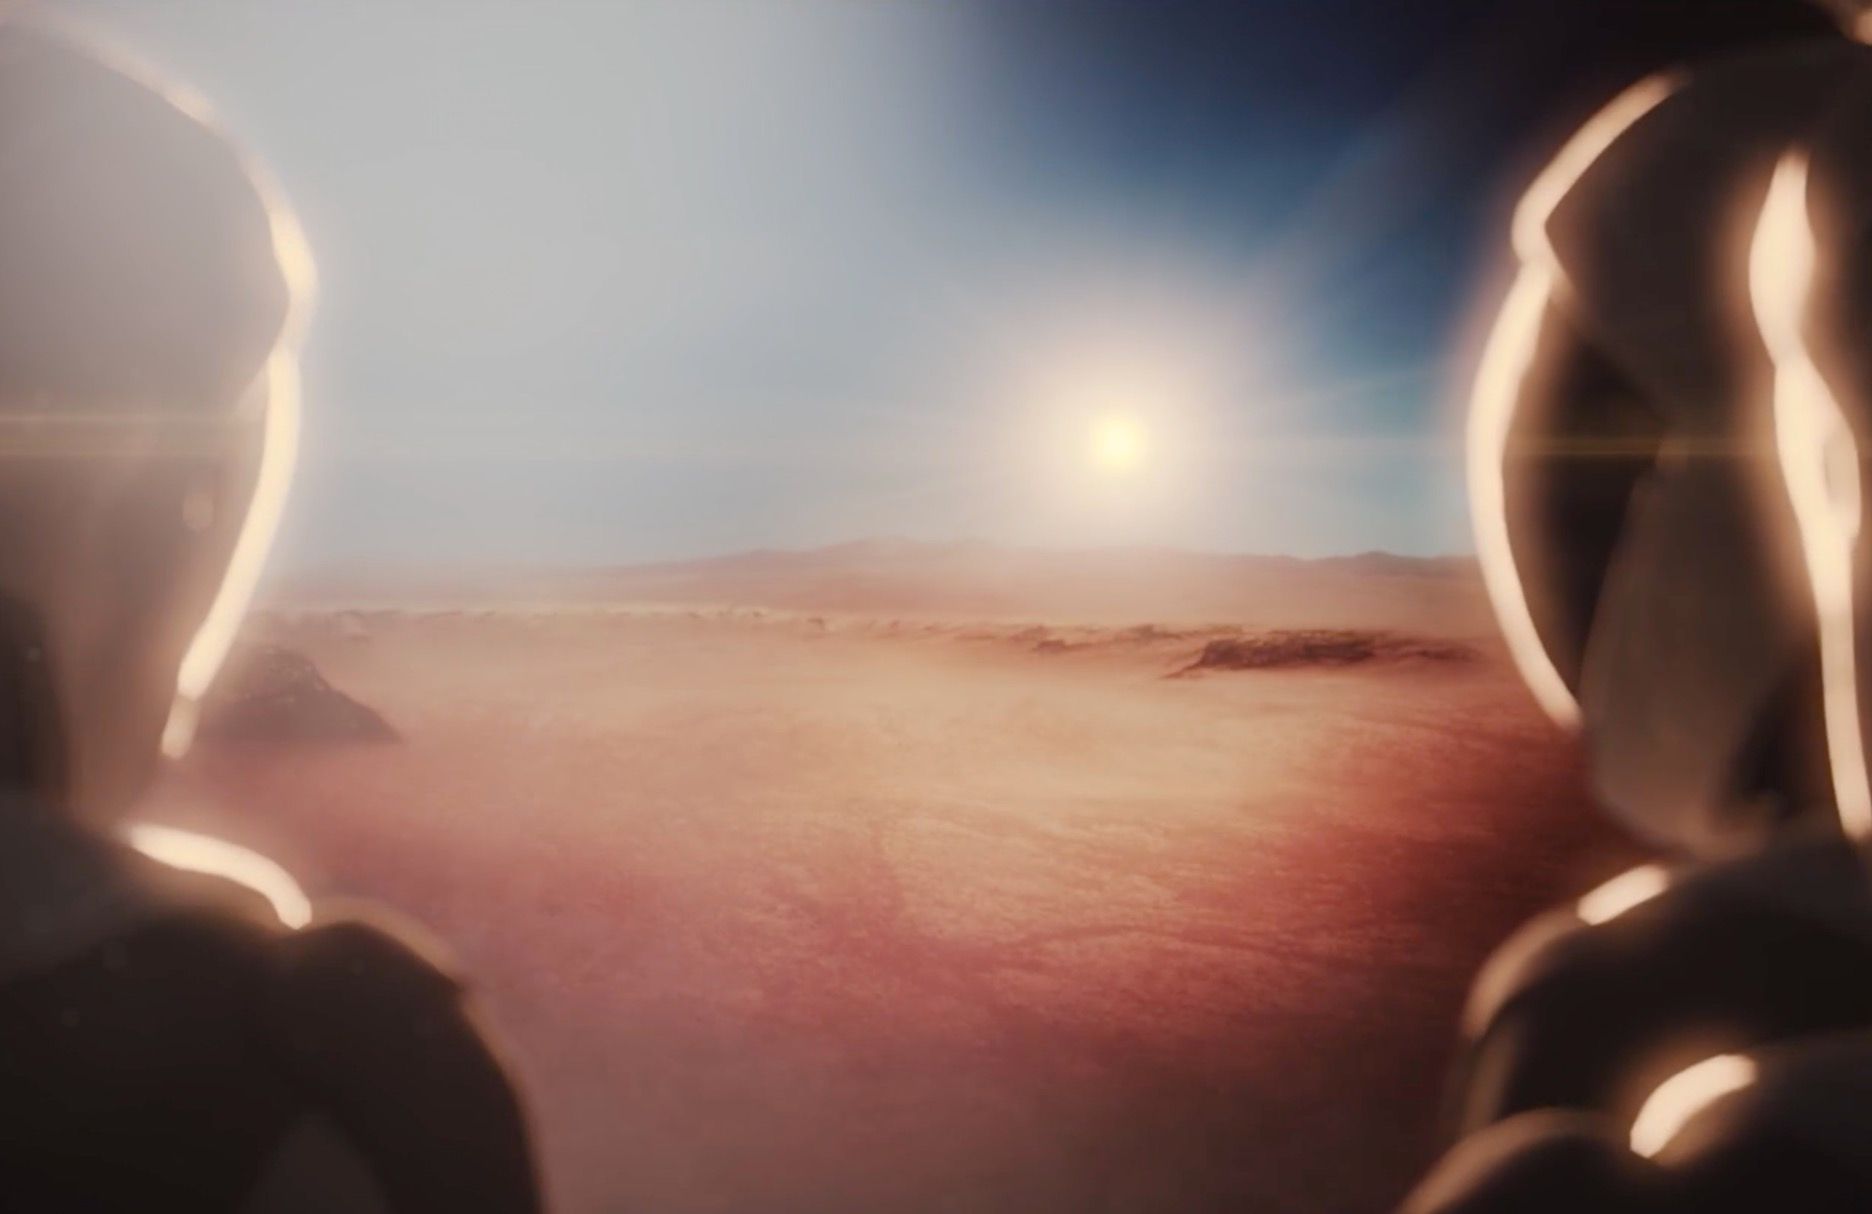 watch elon musk unveil spacex s interplanetary transport system  image 1